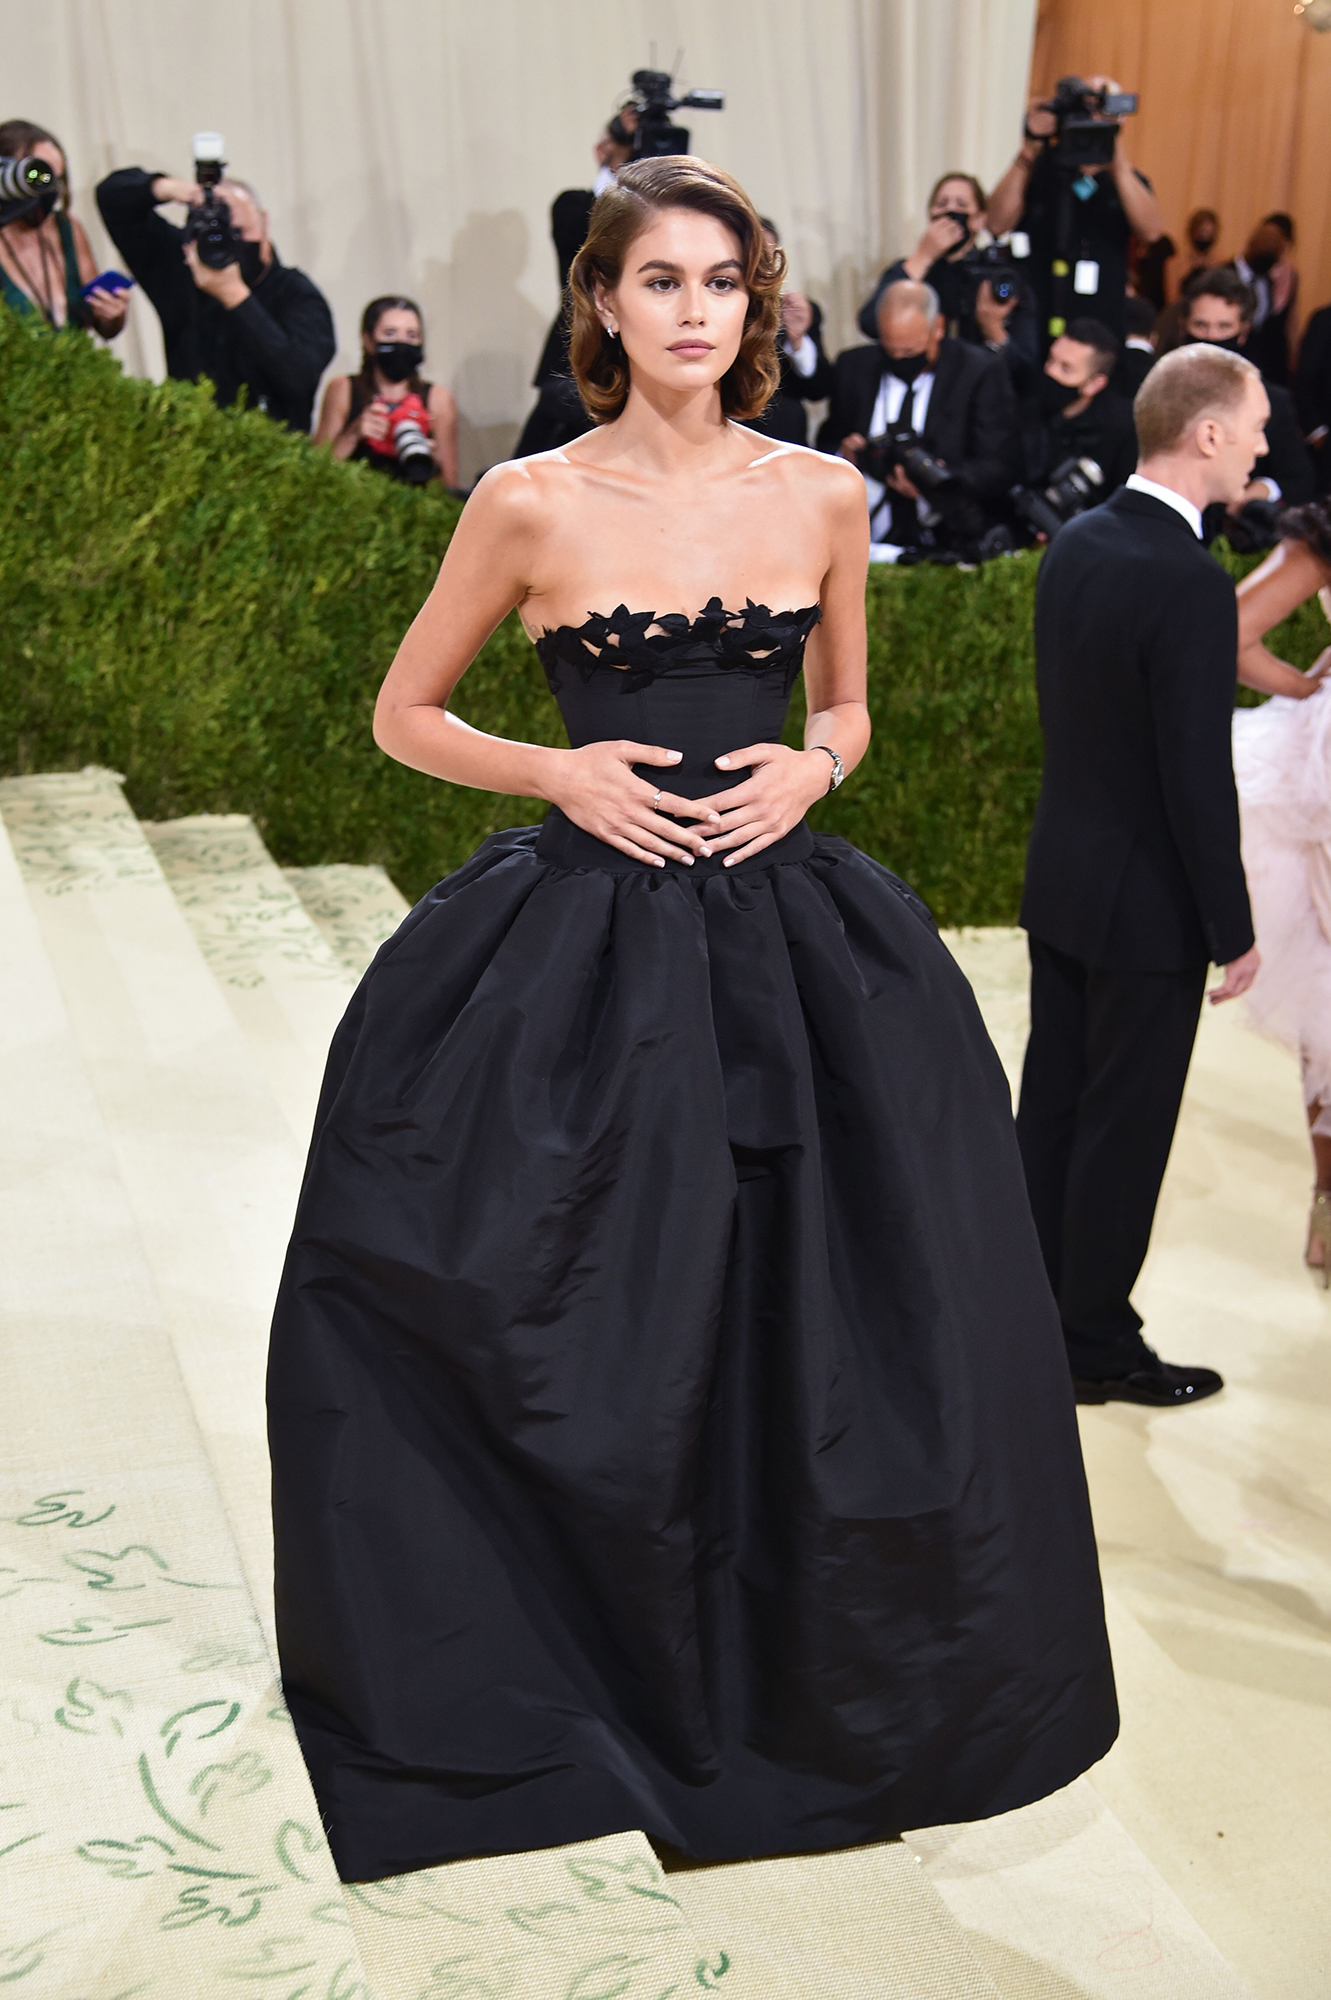 Met Gala 2021 Red Carpet Fashion: What the Stars Wore | Us Weekly